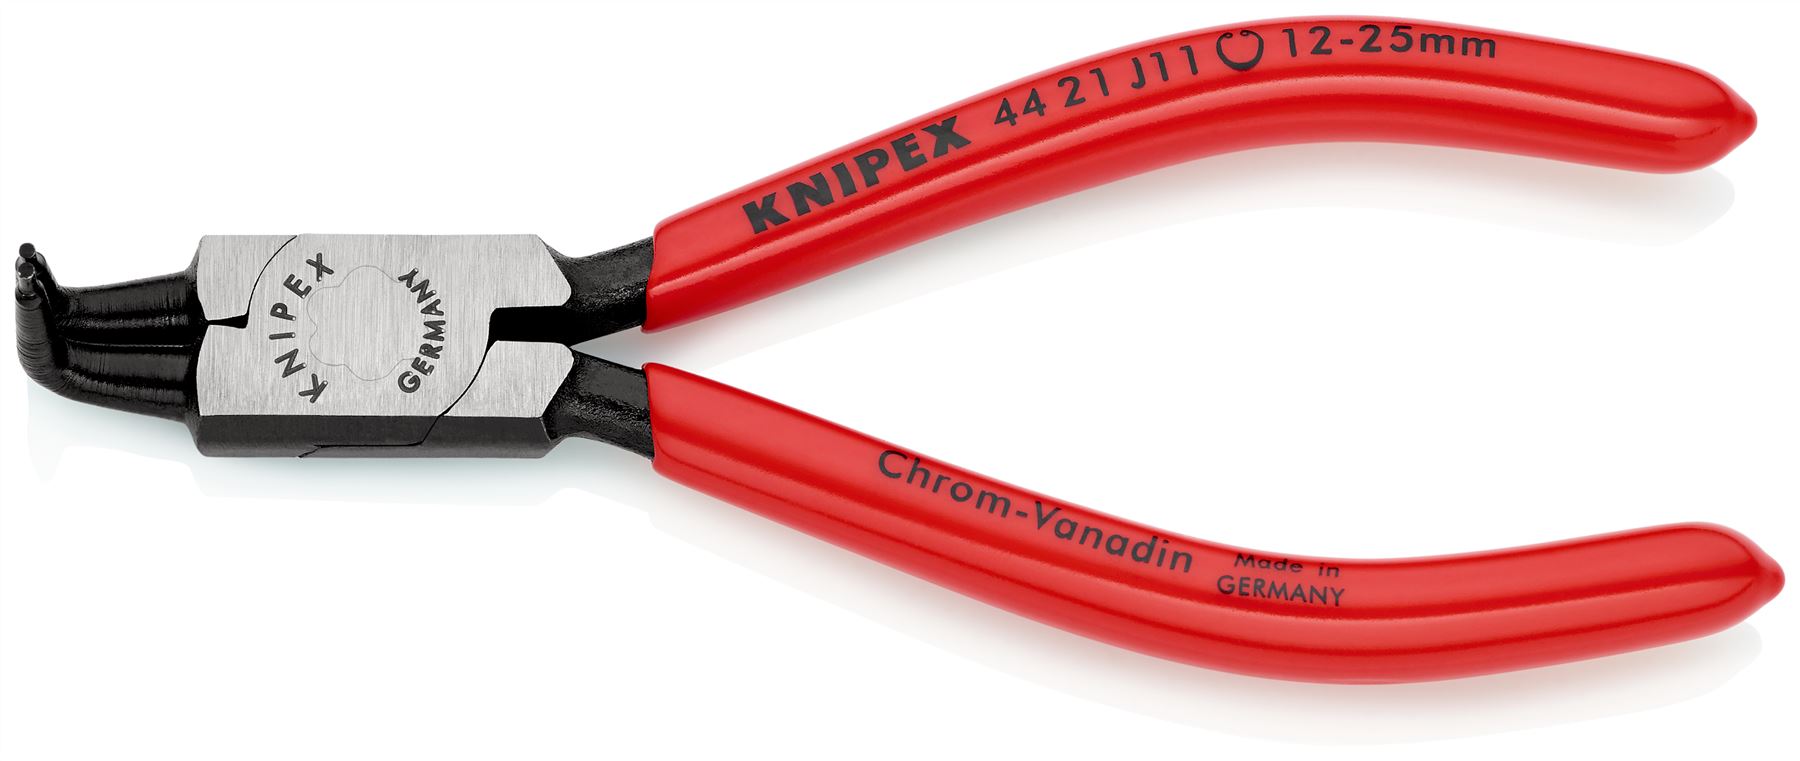 KNIPEX Circlip Pliers for Internal Circlips in Bore Holes Bent Nose 130mm 1.3mm Diameter Tips 44 21 J11